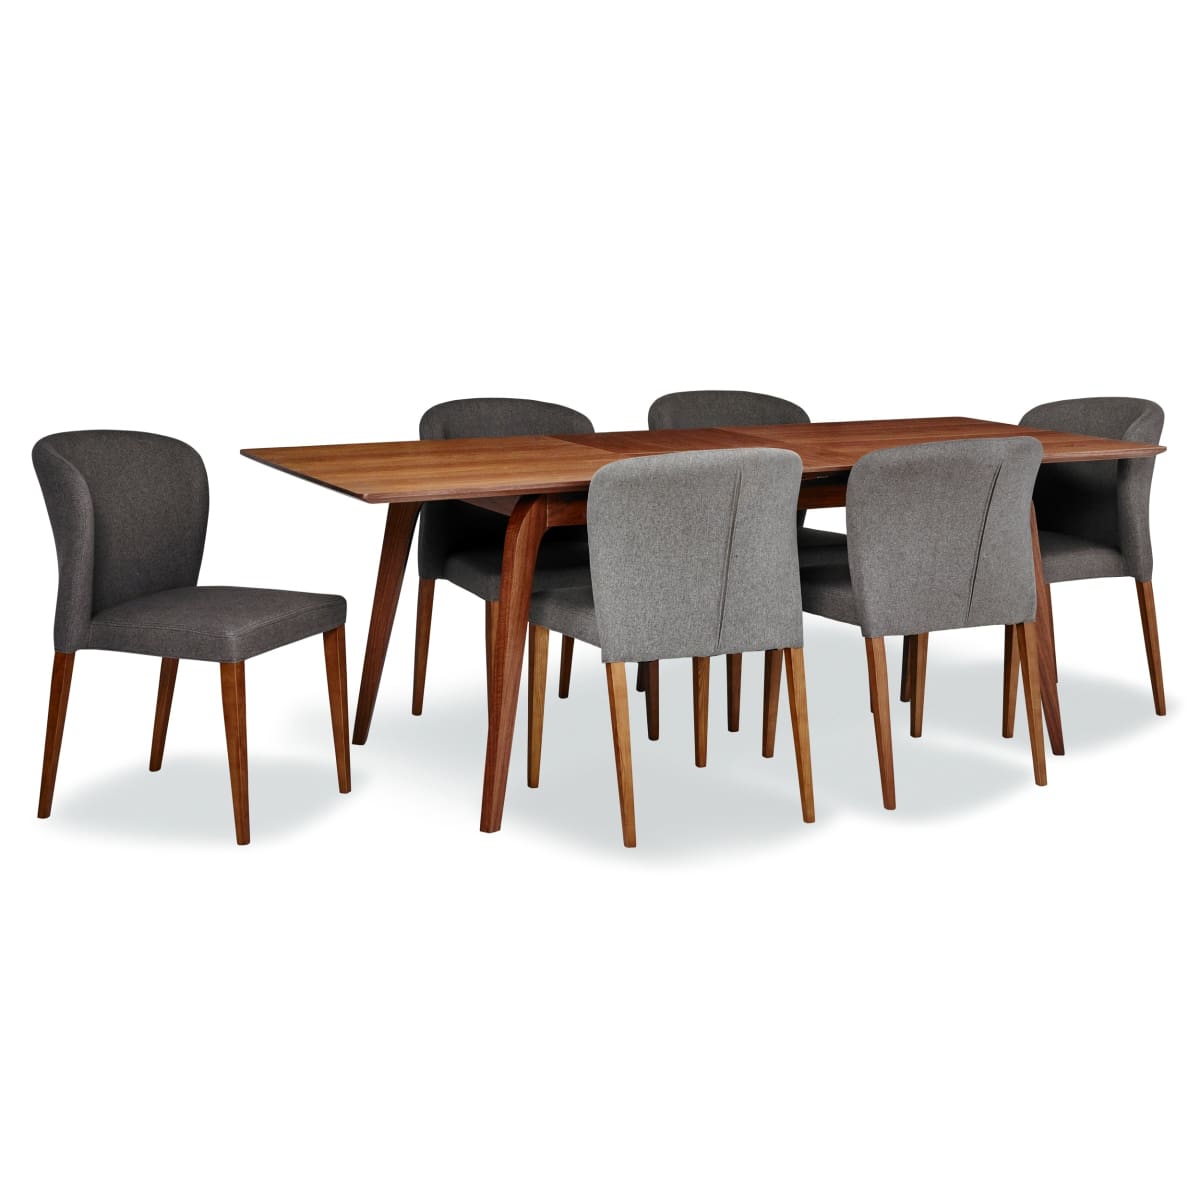 Cyrus Dining Table - dining-table